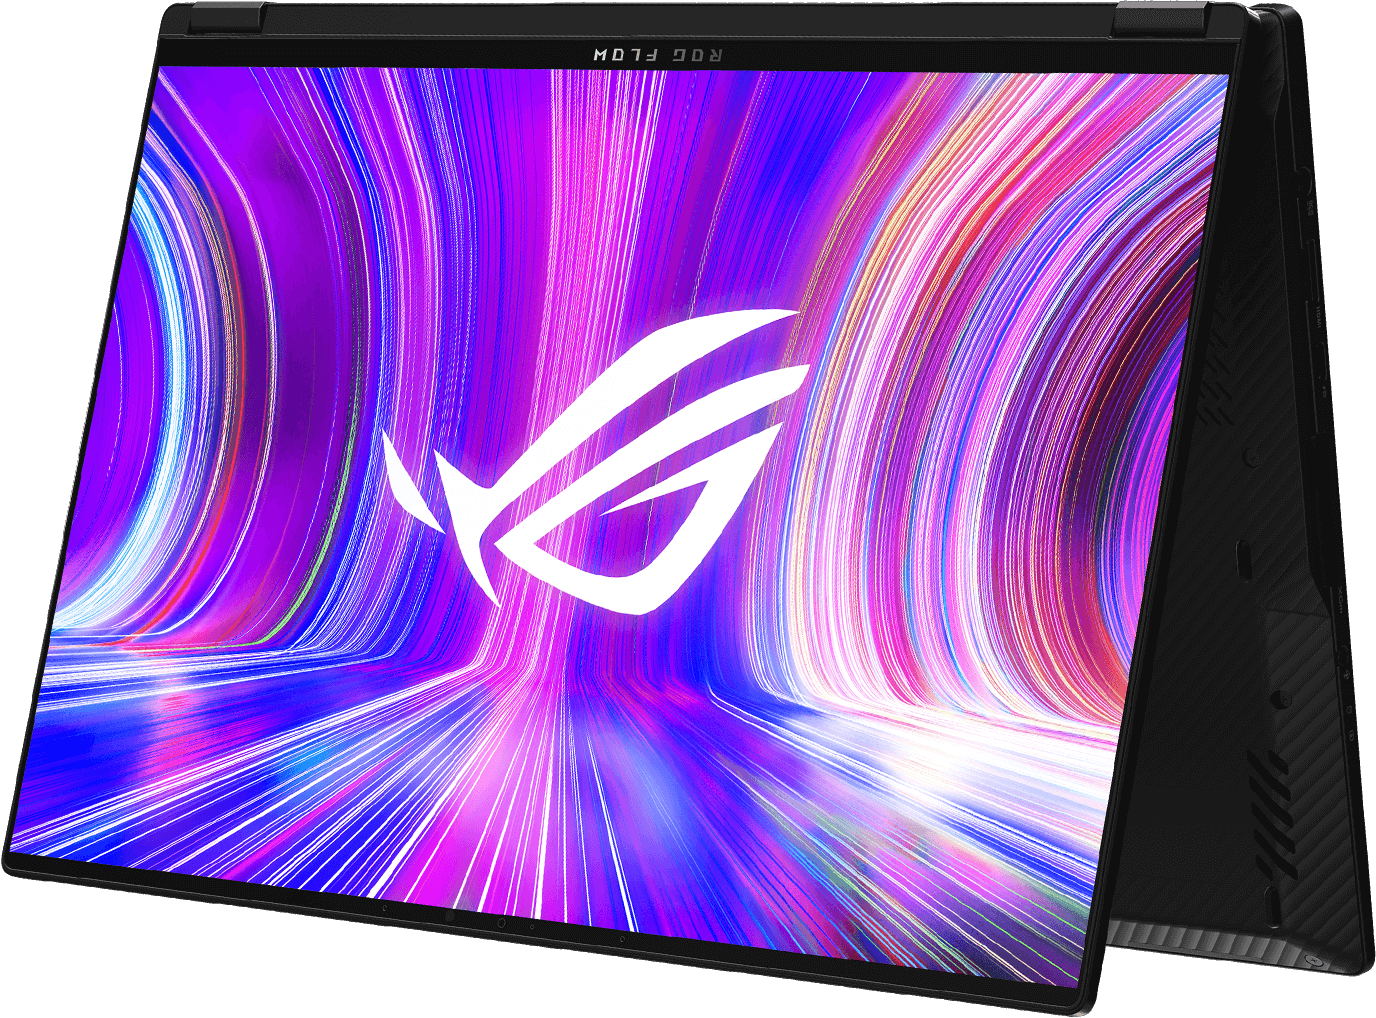 The ROG Flow X16 in tent mode with the ROG “Fearless Eye” logo on screen.